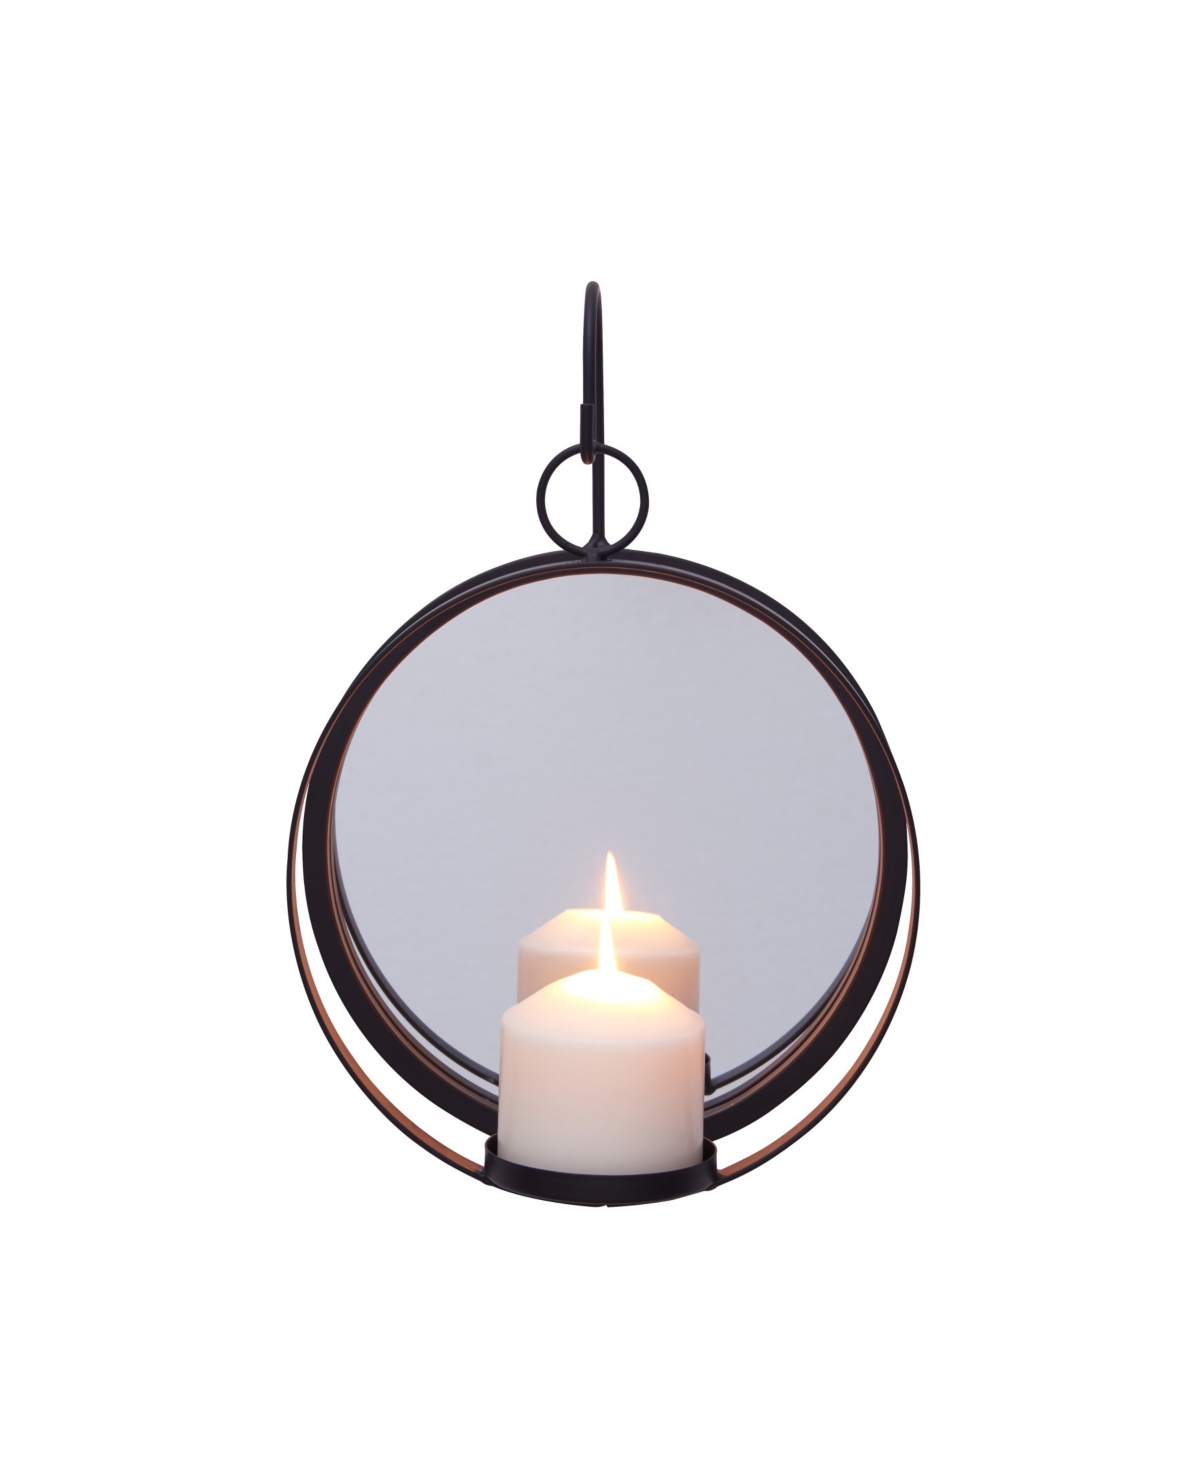 Danya B . Round Iron Pillar Candle Sconce With Mirror In Black